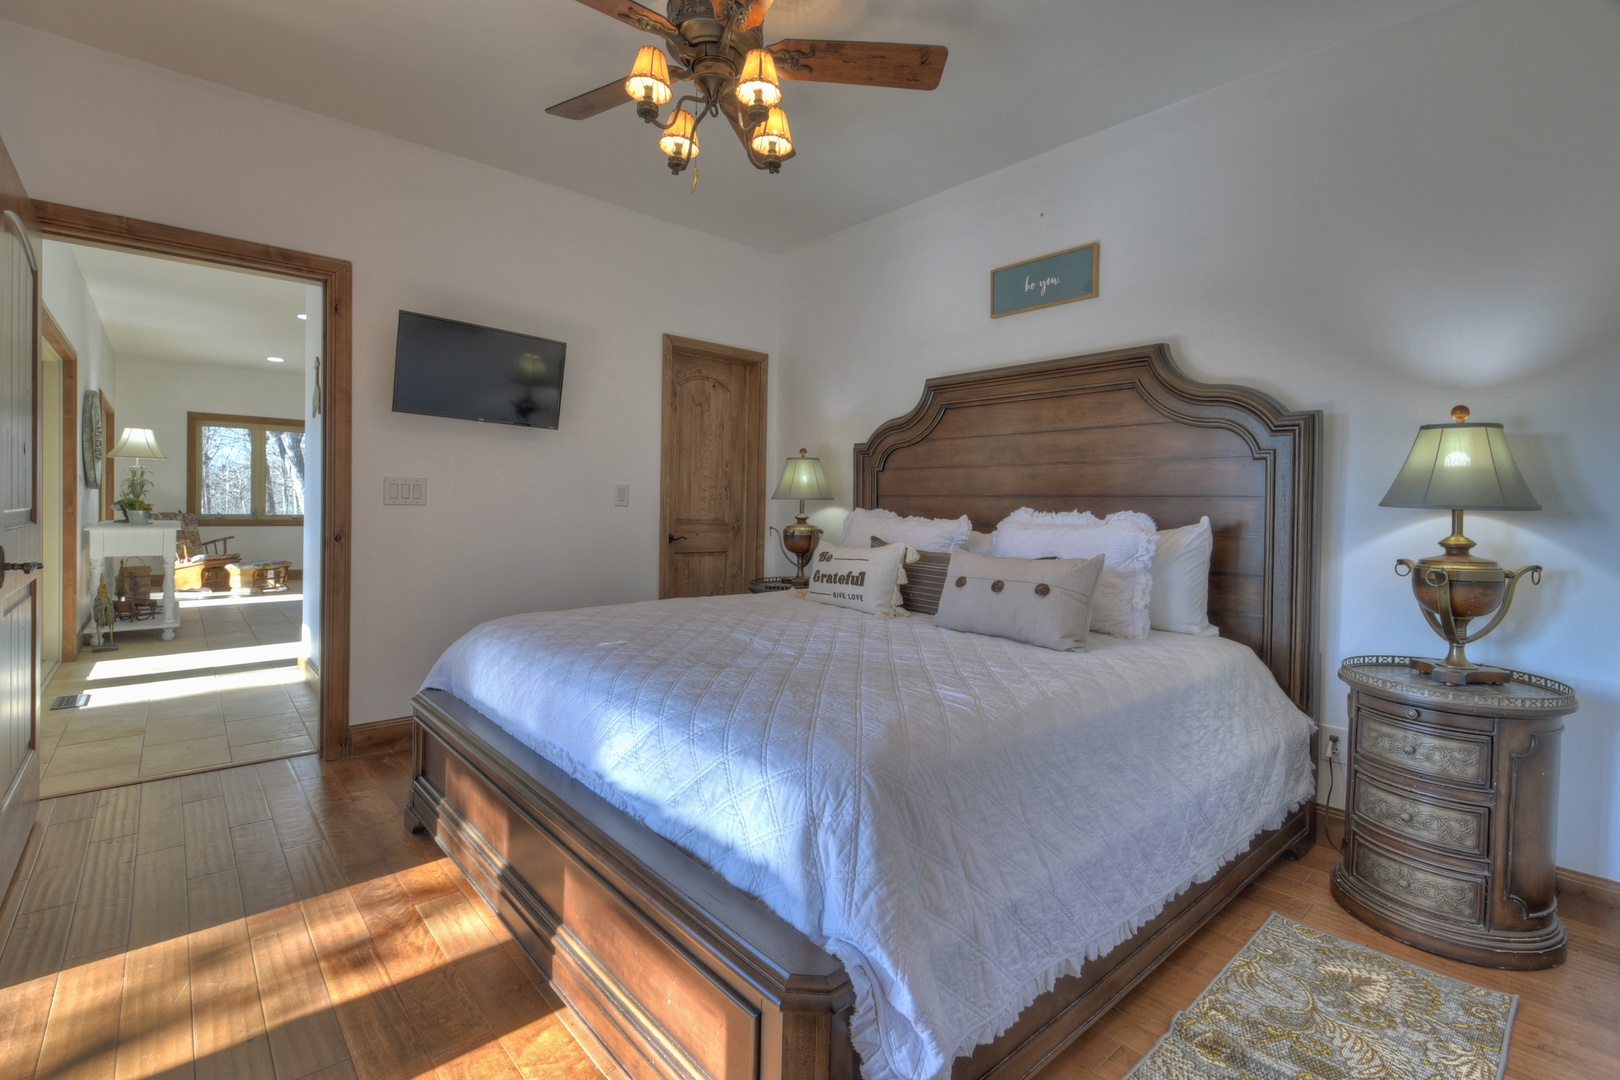 Family Farmhouse- Entry level king guest bedroom